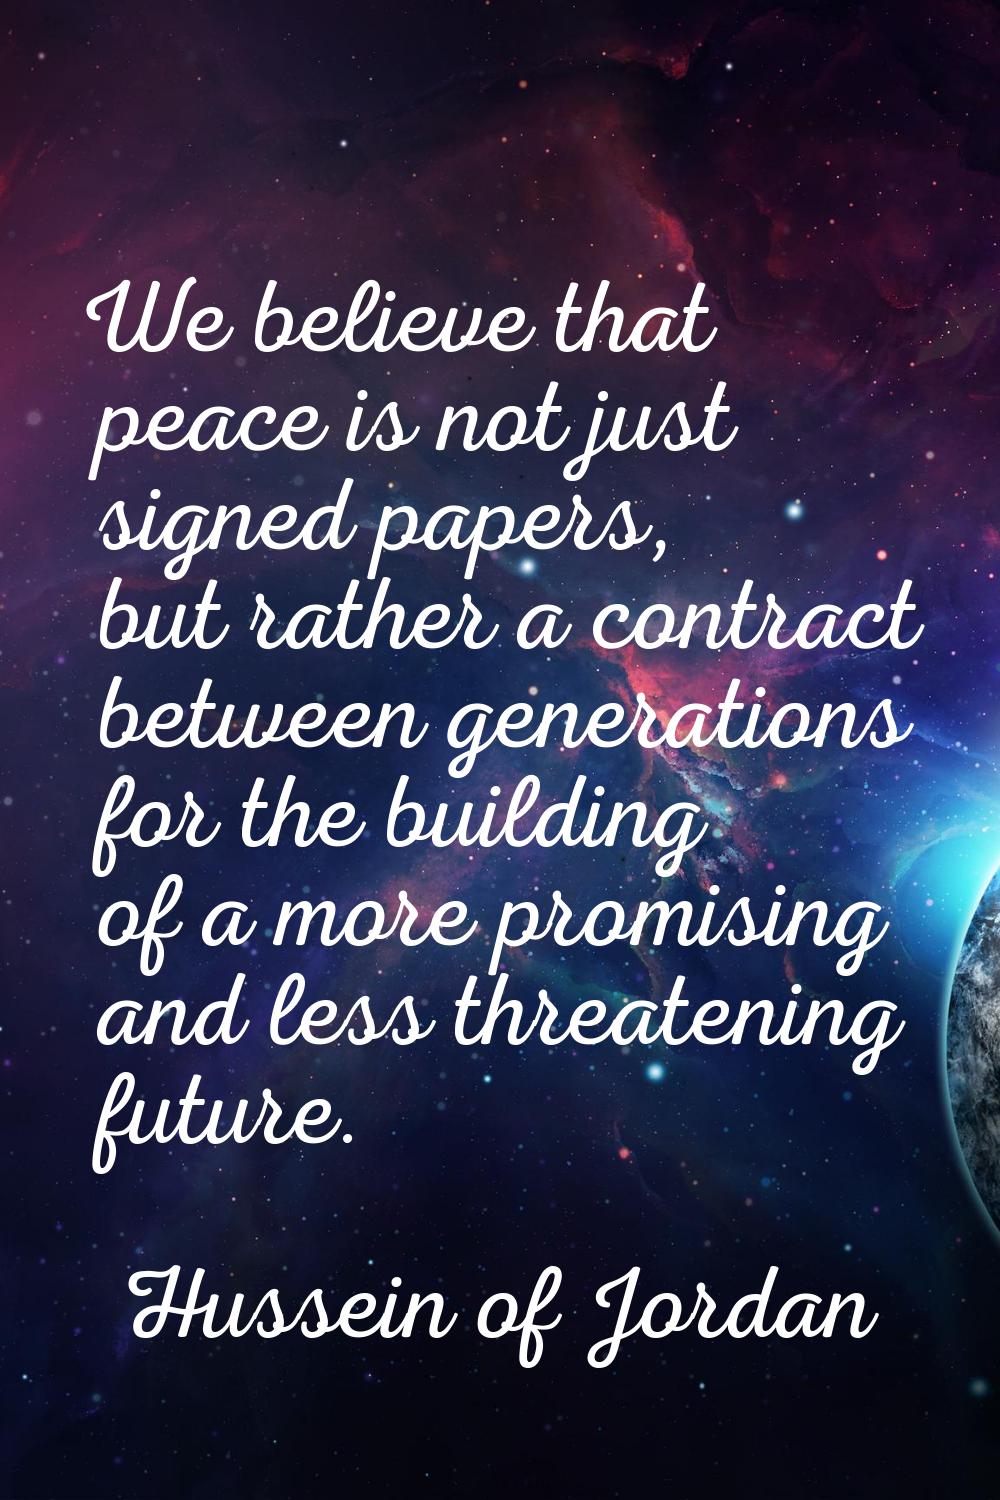 We believe that peace is not just signed papers, but rather a contract between generations for the 